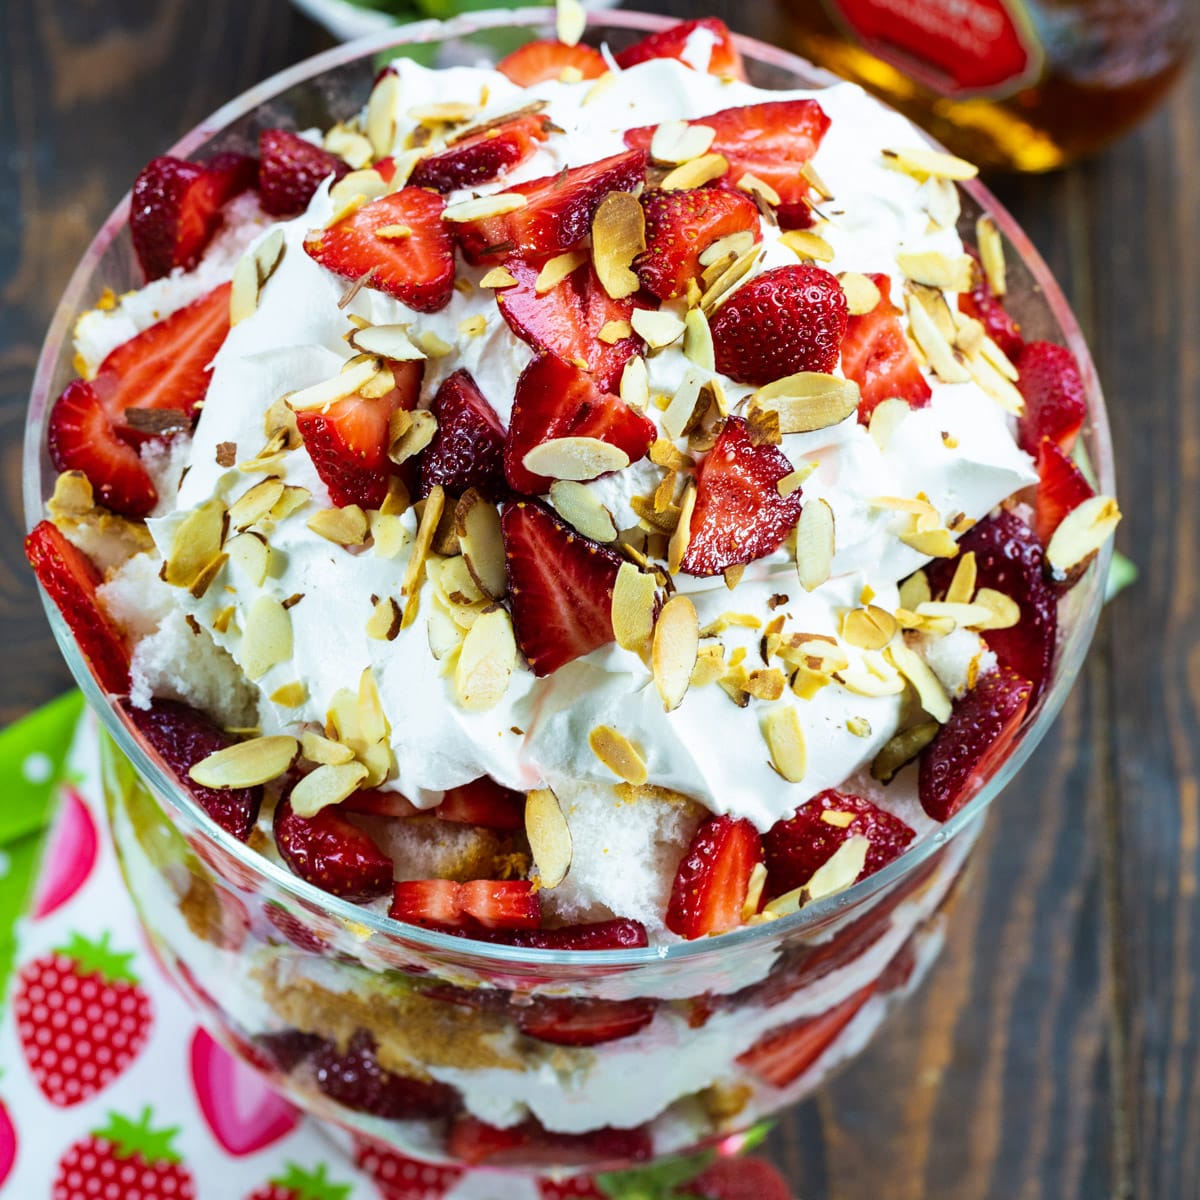 Strawberry Amaretto Trifle topped with slivered almonds.